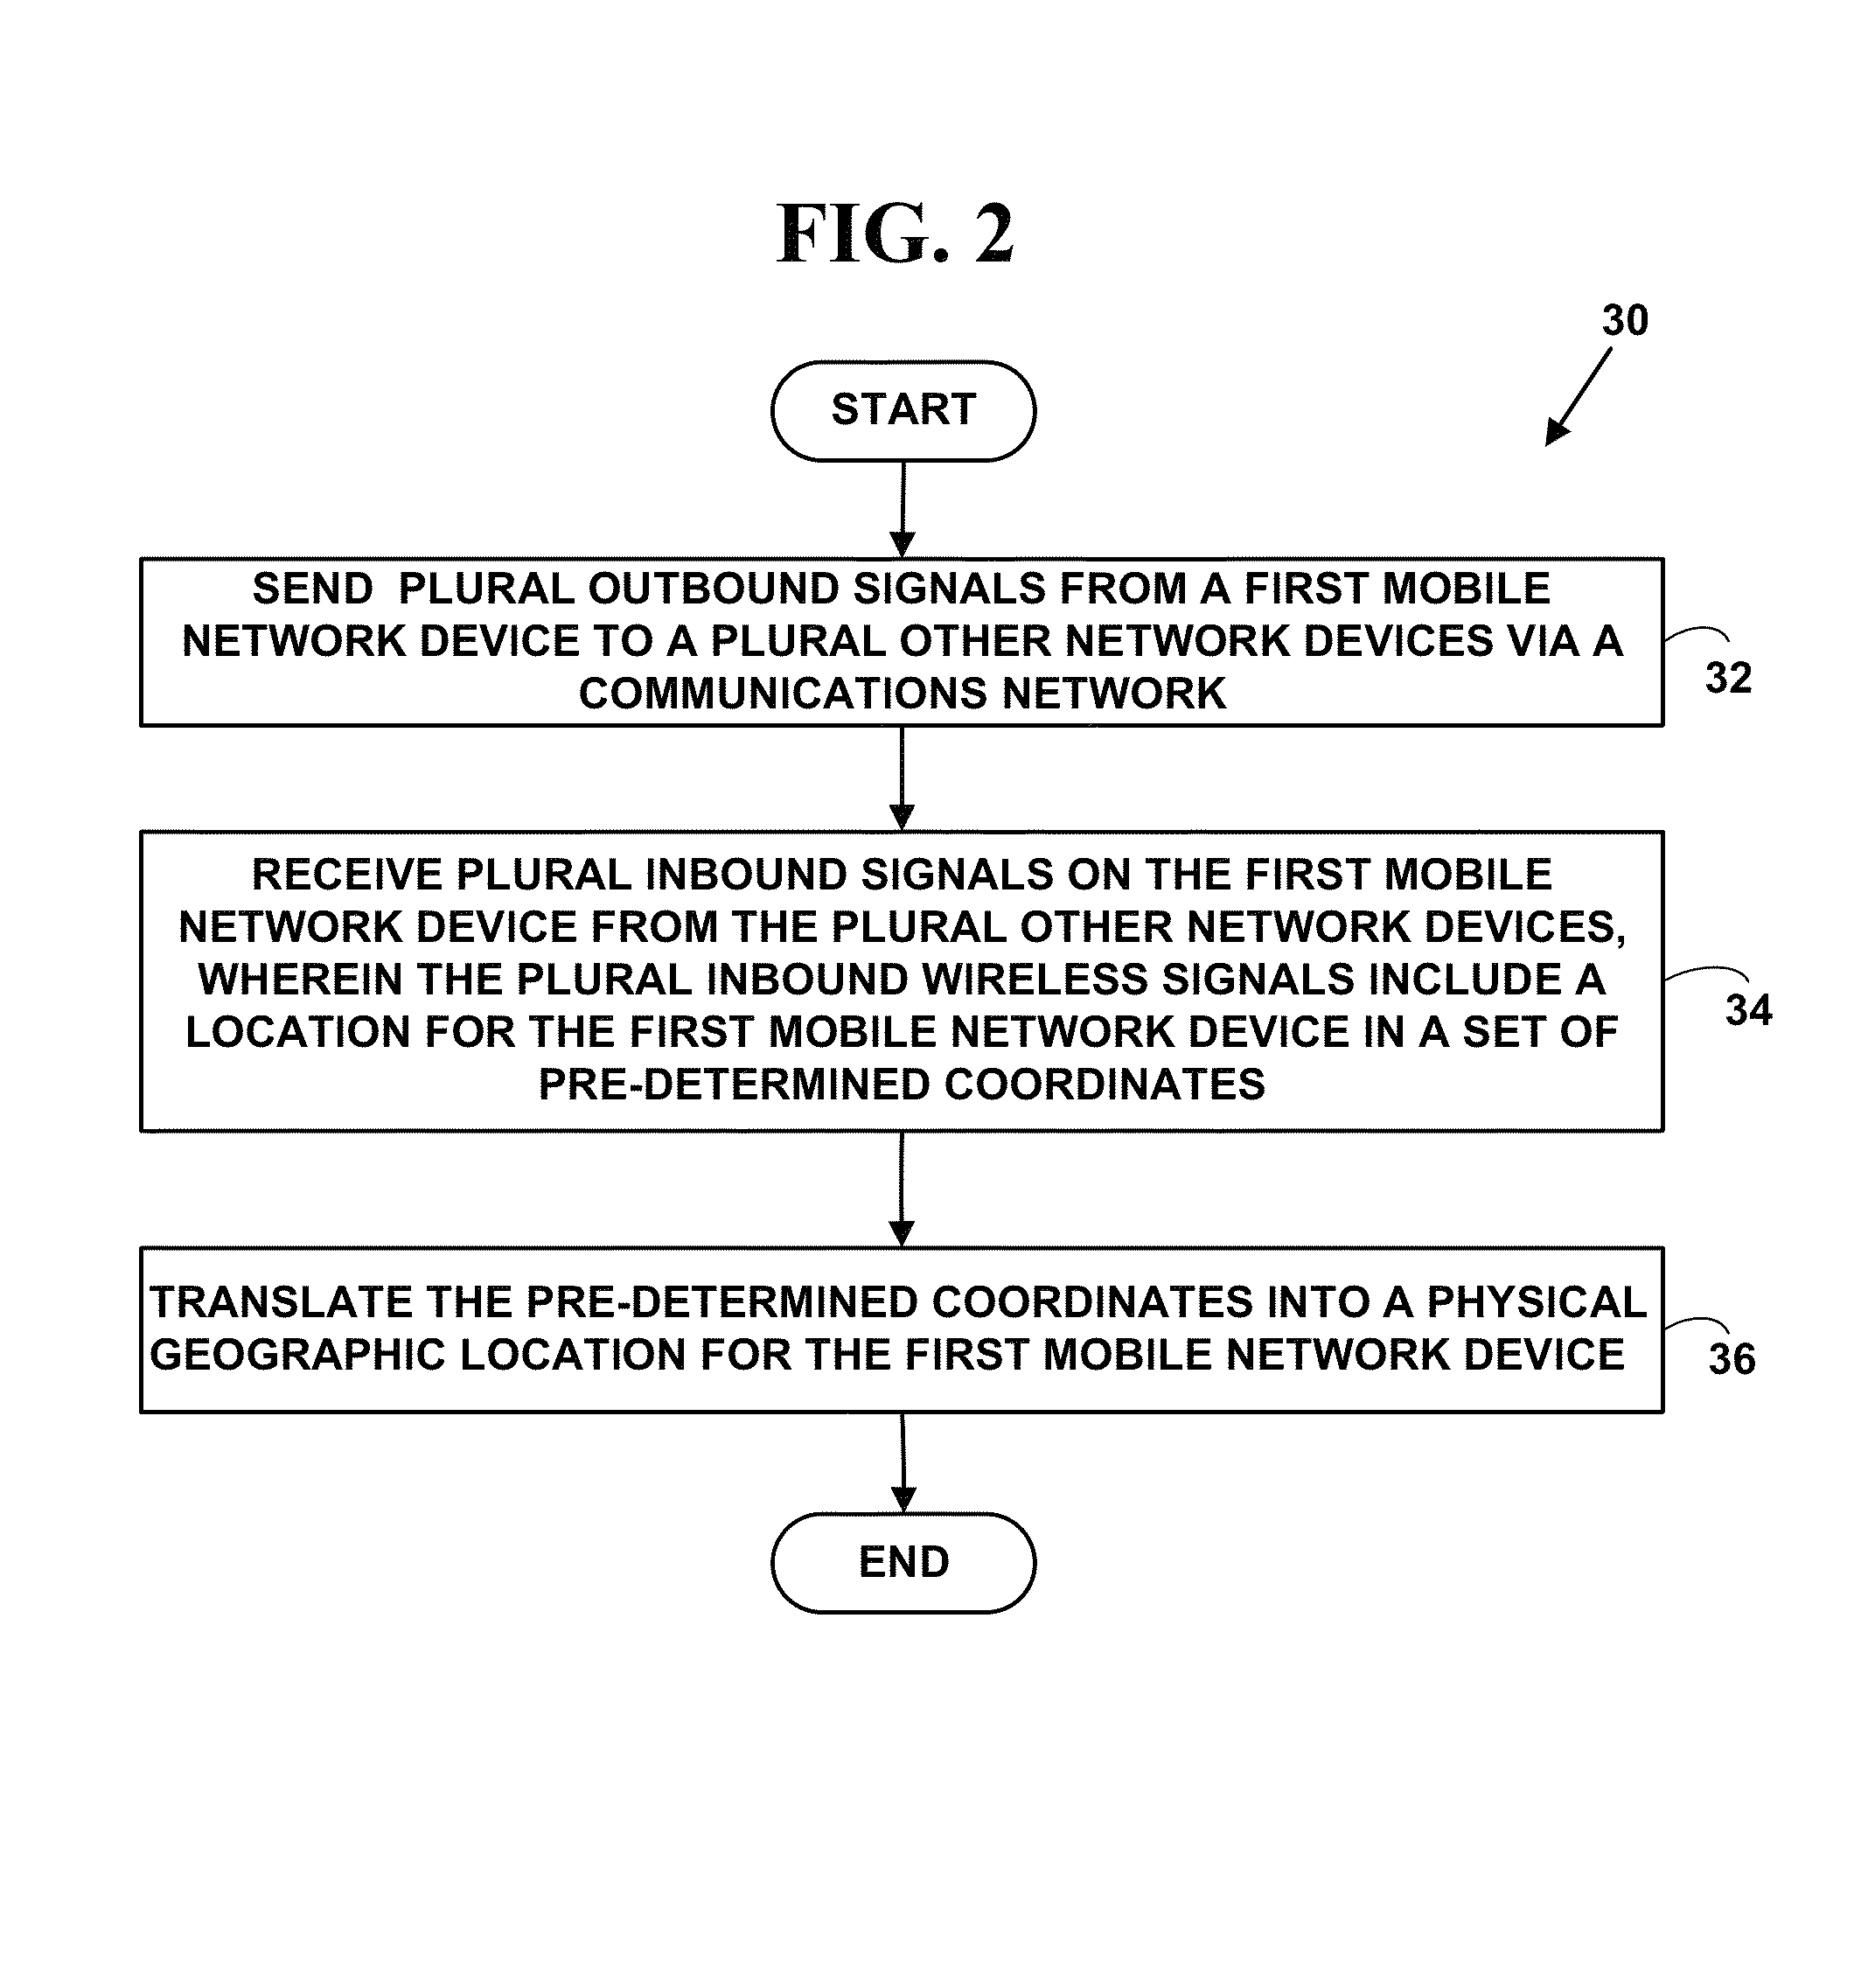 Method and system for an emergency location information service (E-LIS) from unmanned aerial vehicles (UAV)